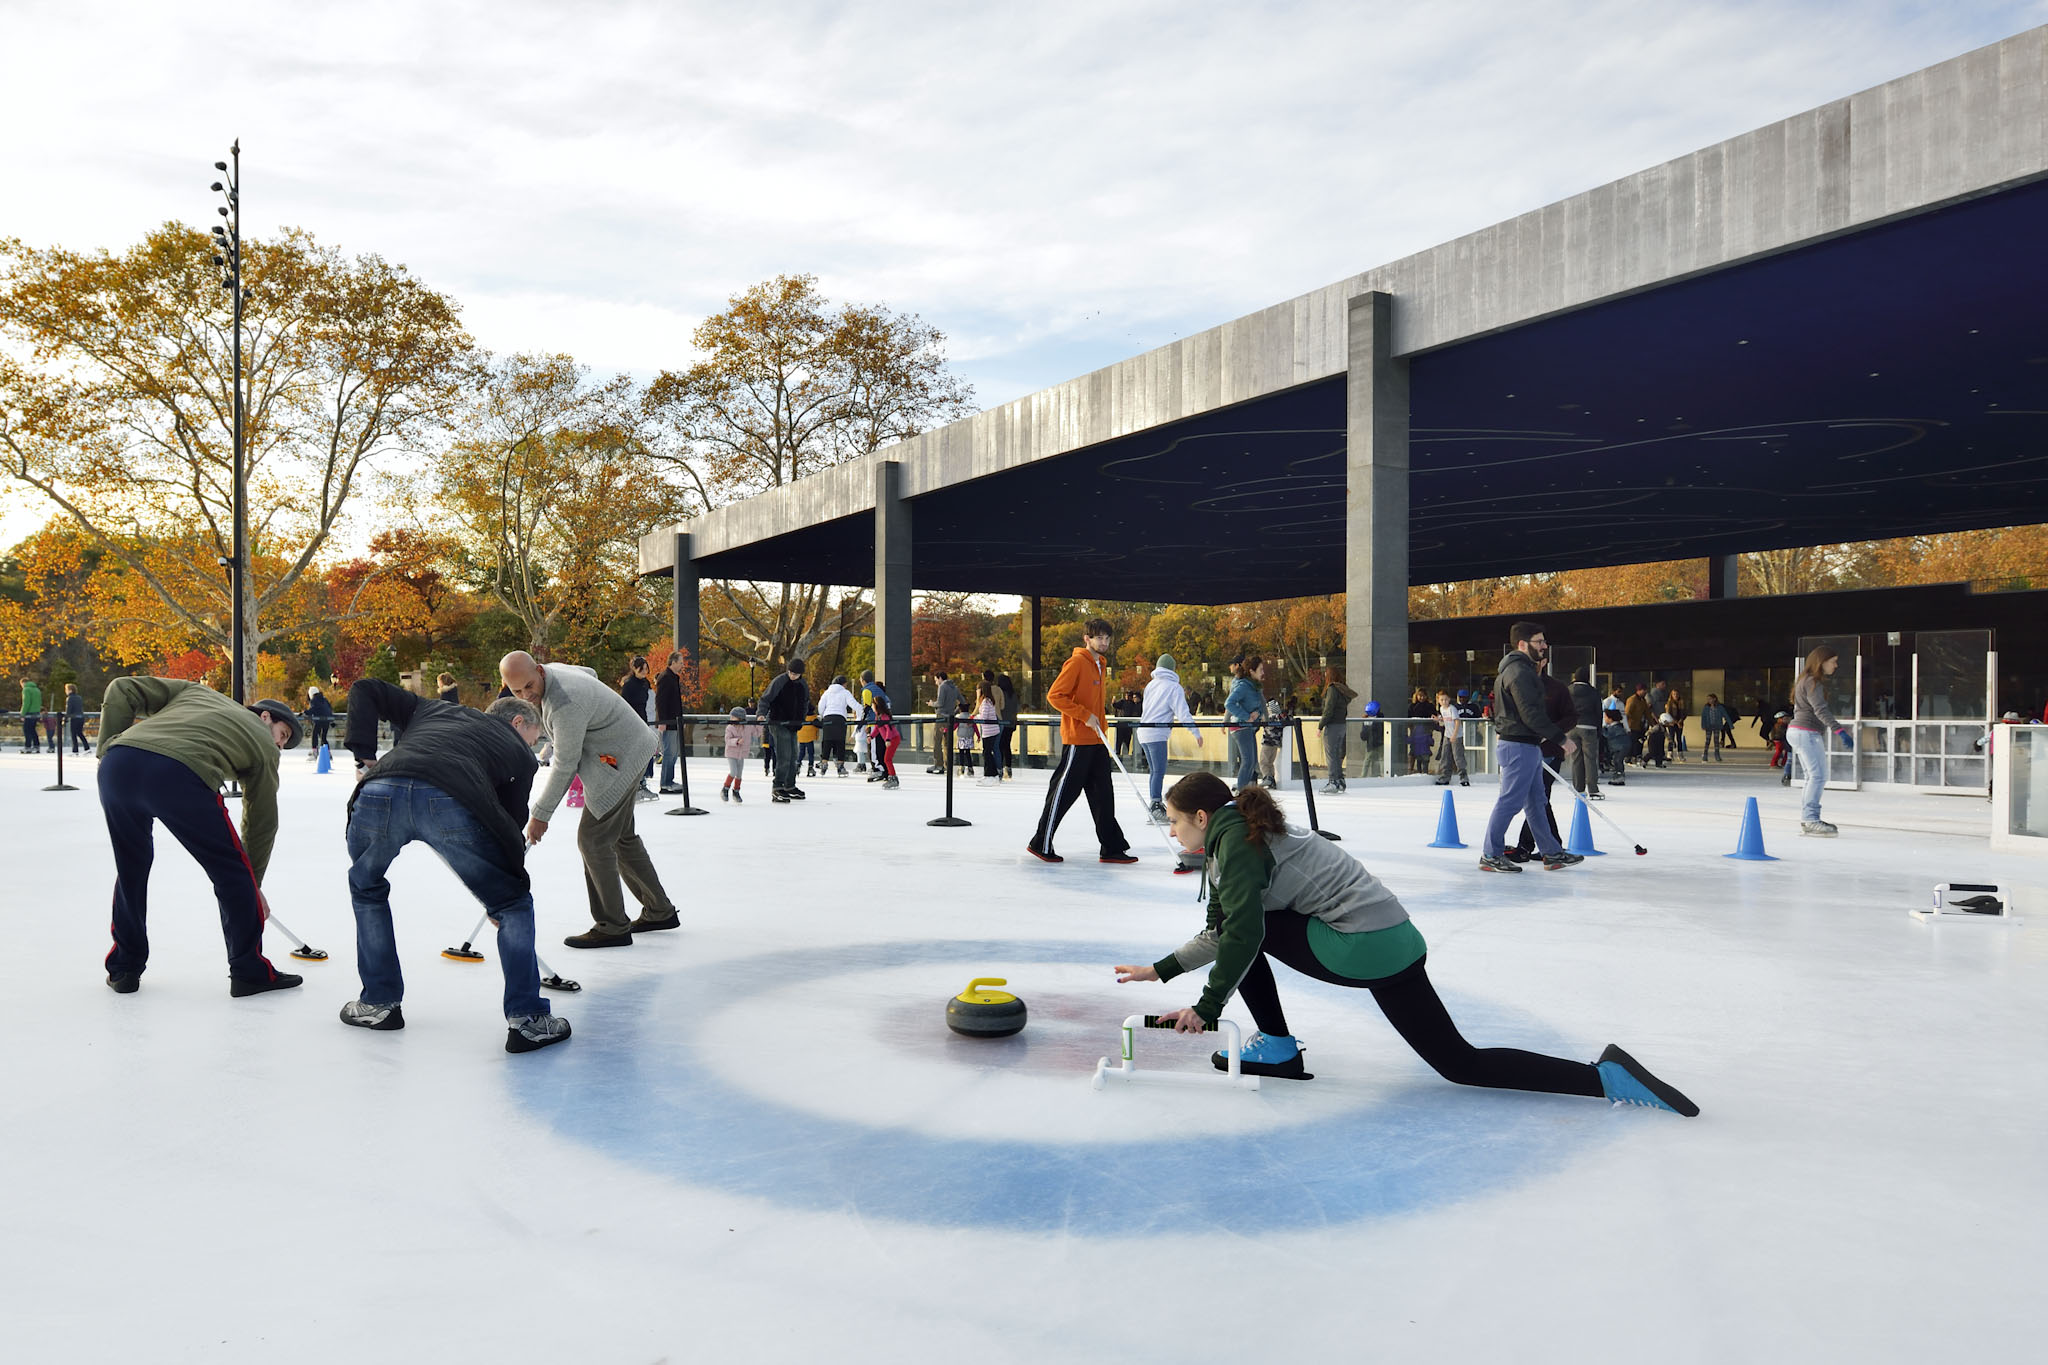 You can ice skate at LeFrak Center at Lakeside or try your hand at curling. Photo: Martin Seck via the Prospect Park Alliance